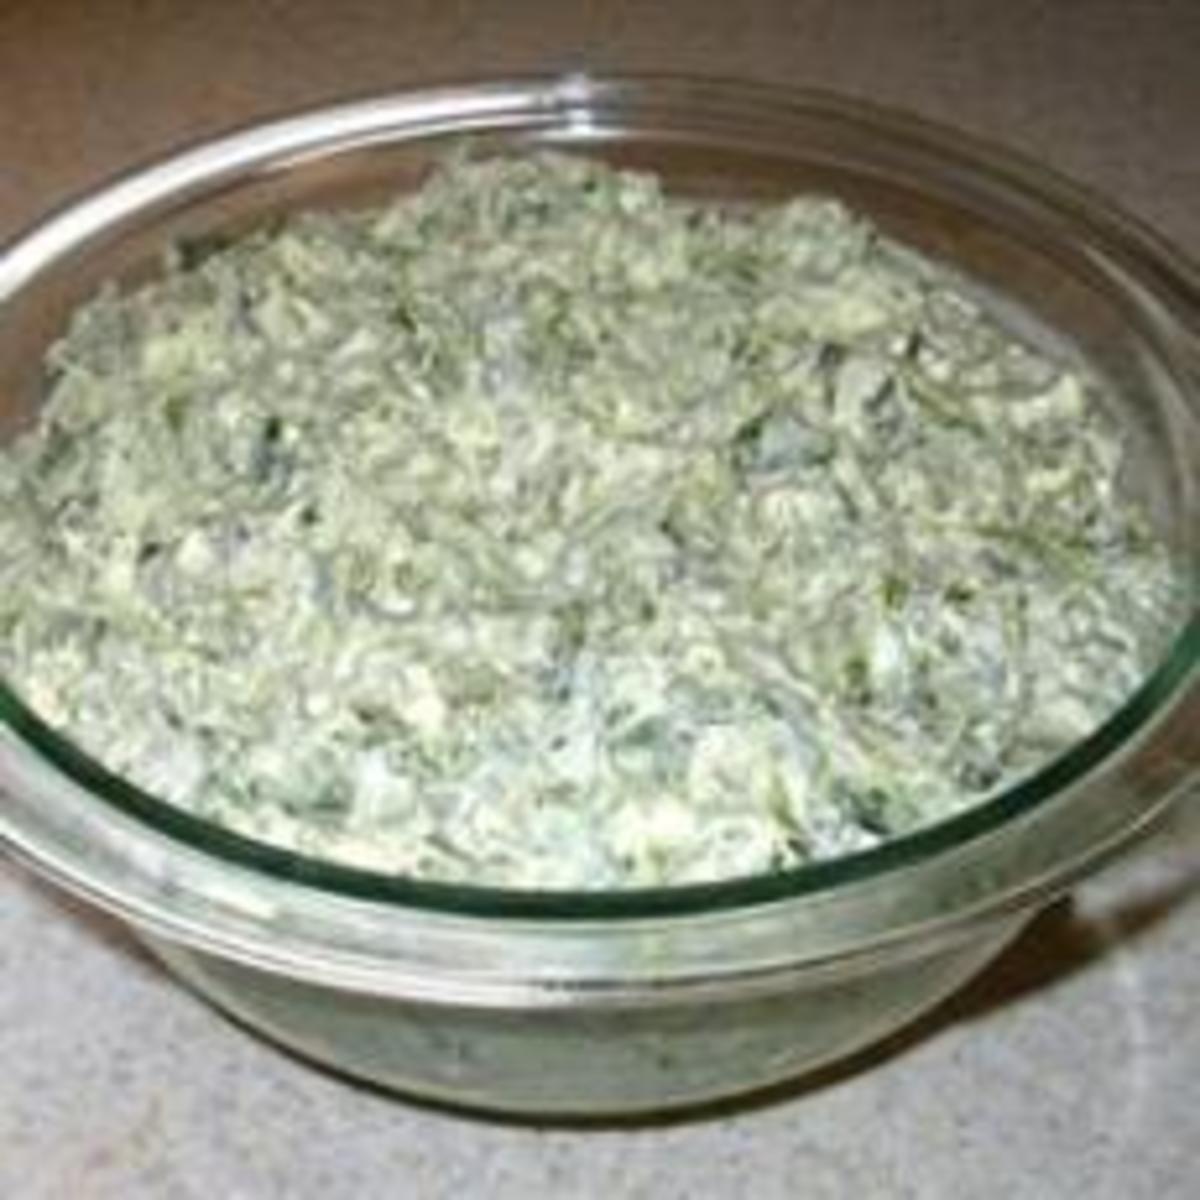 How to Make Great Homemade Spinach and Kale Greek Yogurt Dip